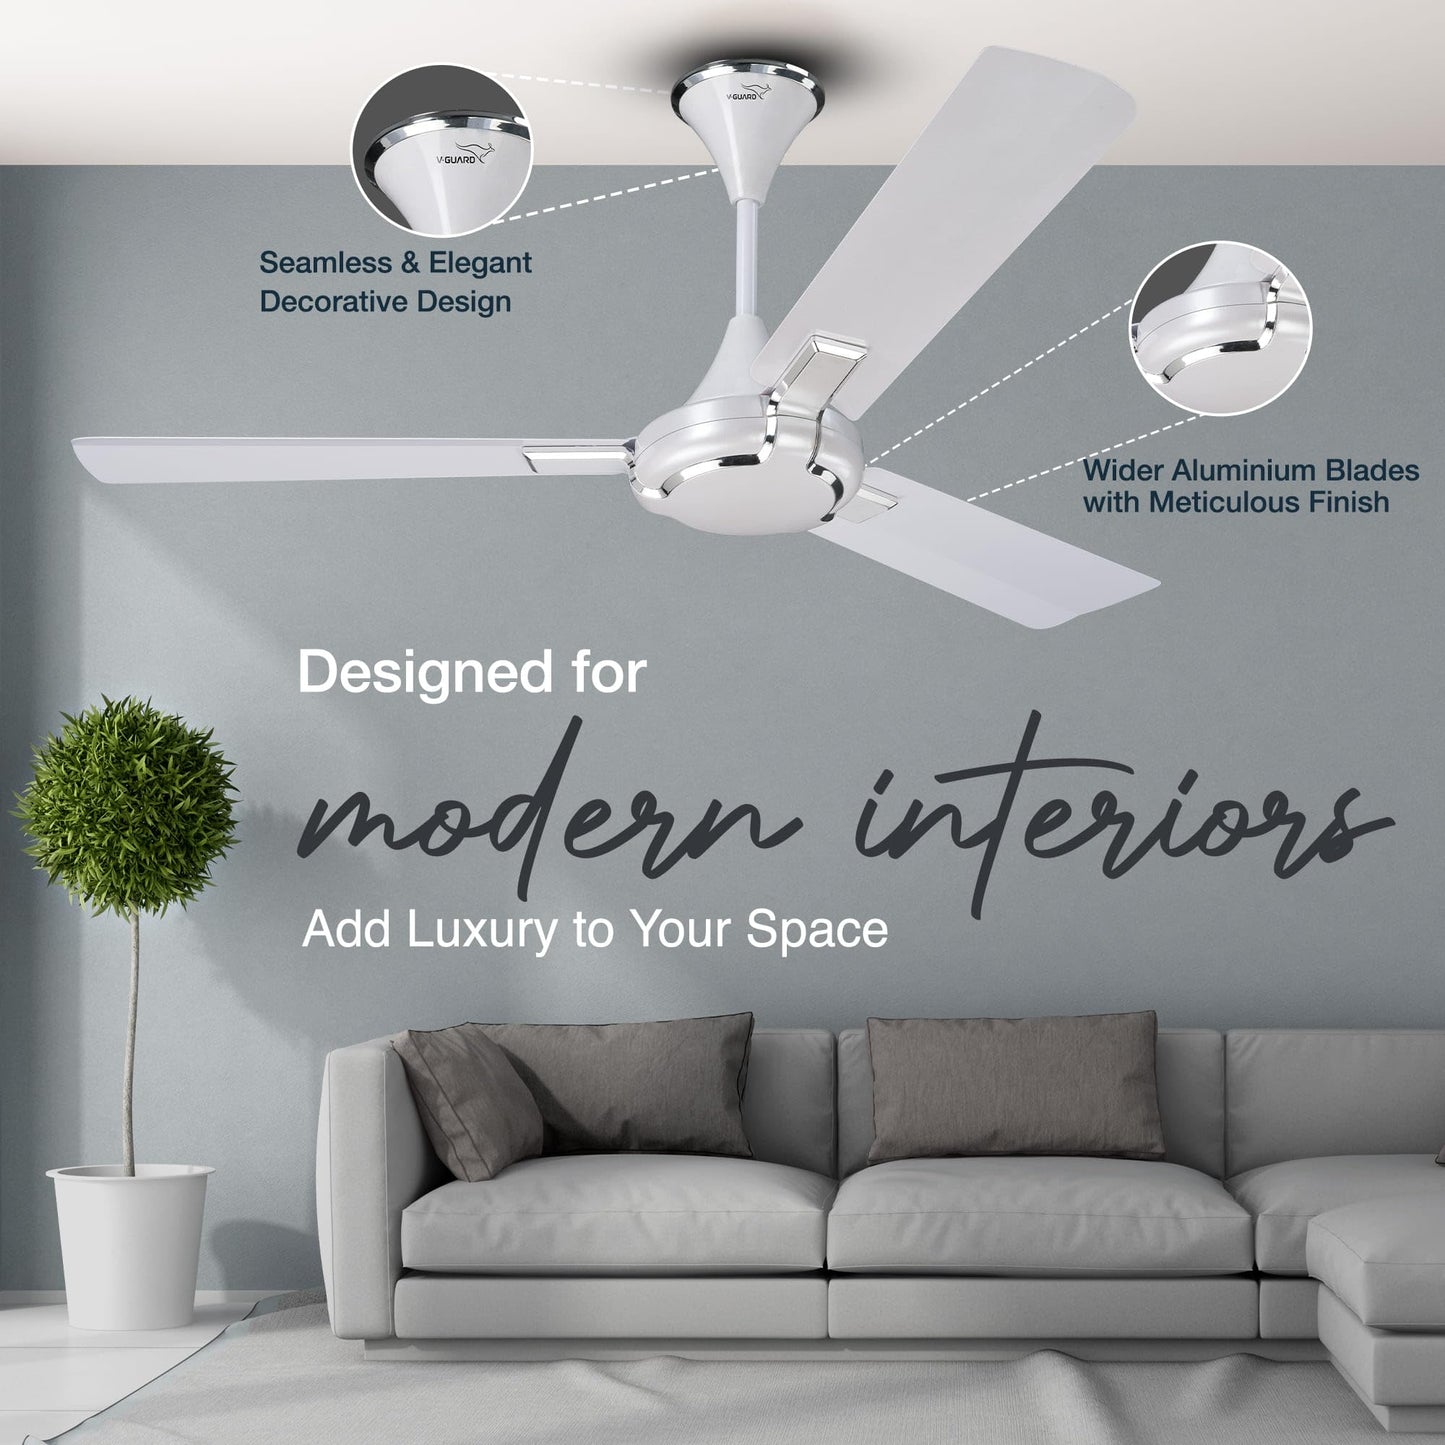 Exado Pro AS Anti Dust High Speed Ceiling Fan for Home 1.2 m, Pearl White